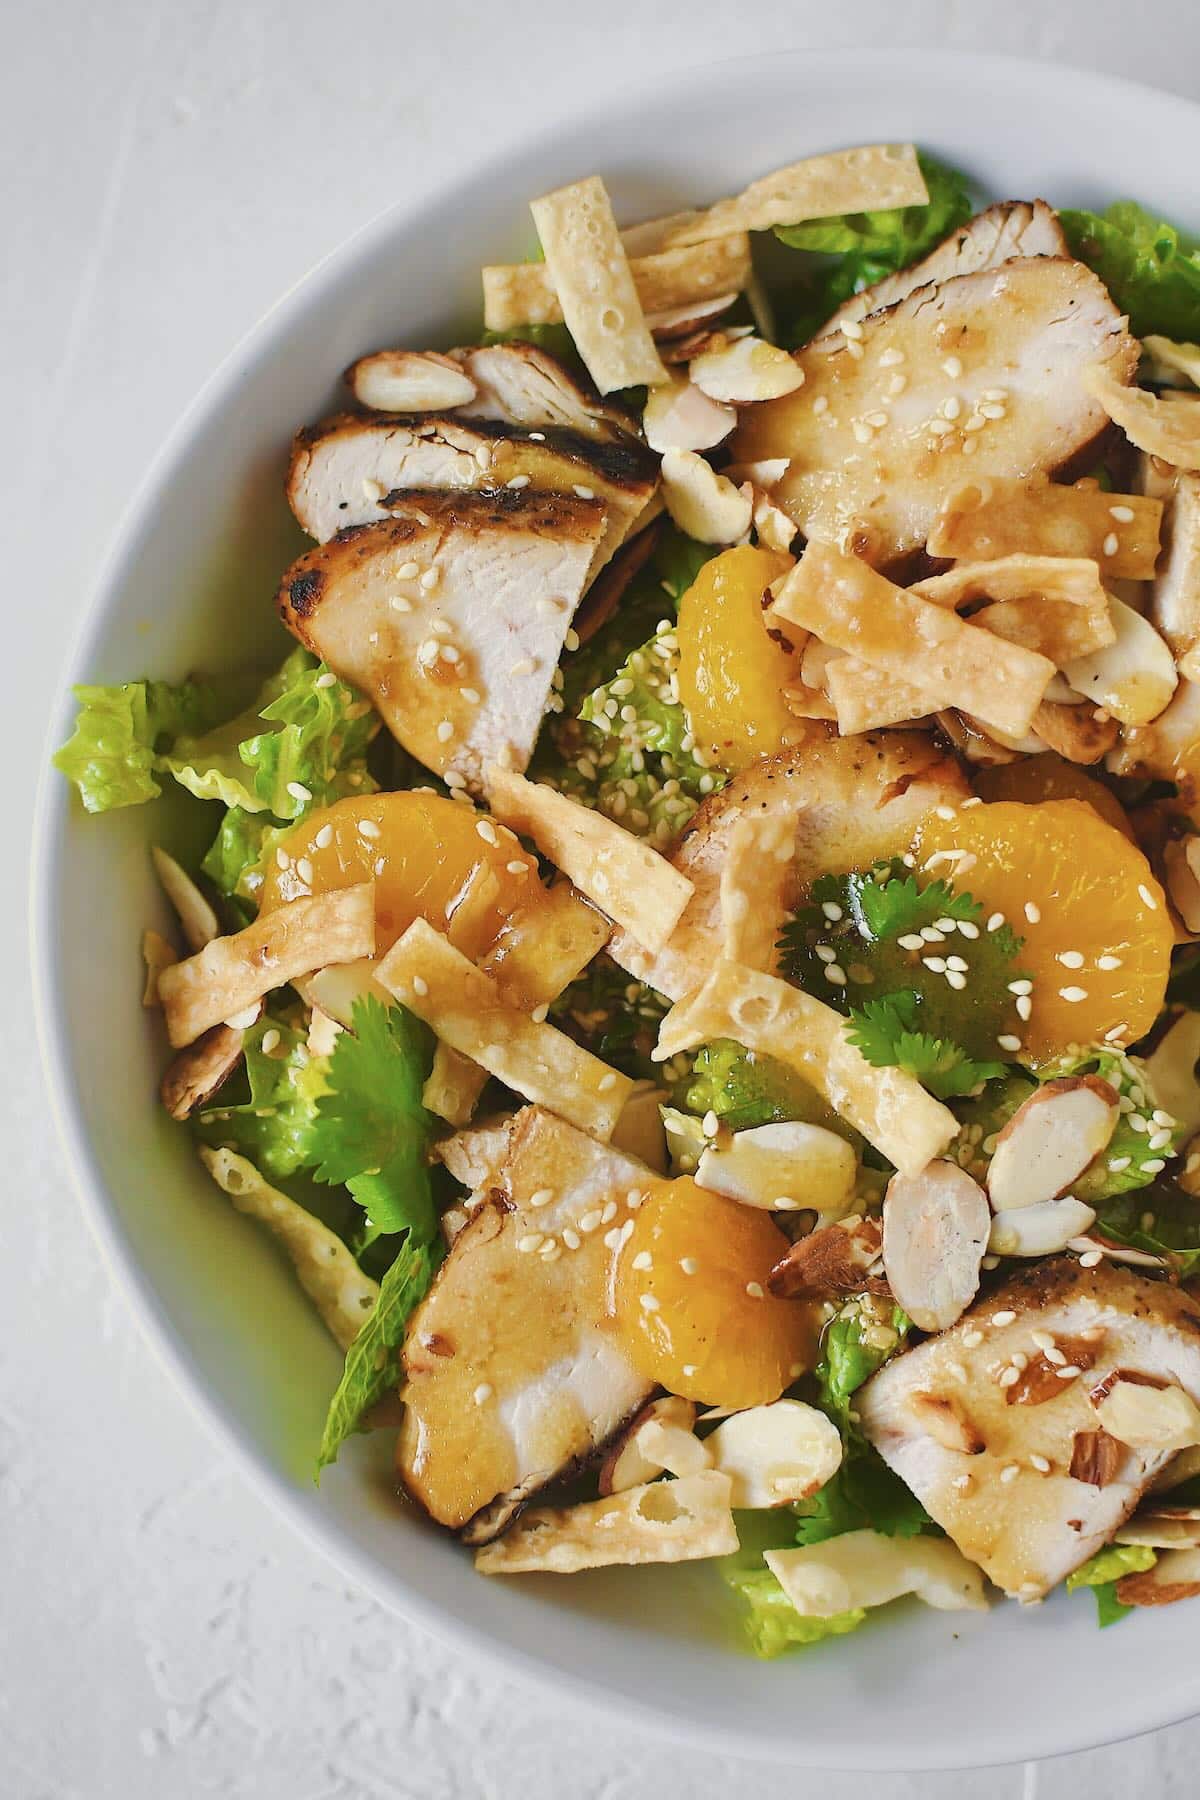 Chicken, crispy wontons, and sliced almonds added to the salad.